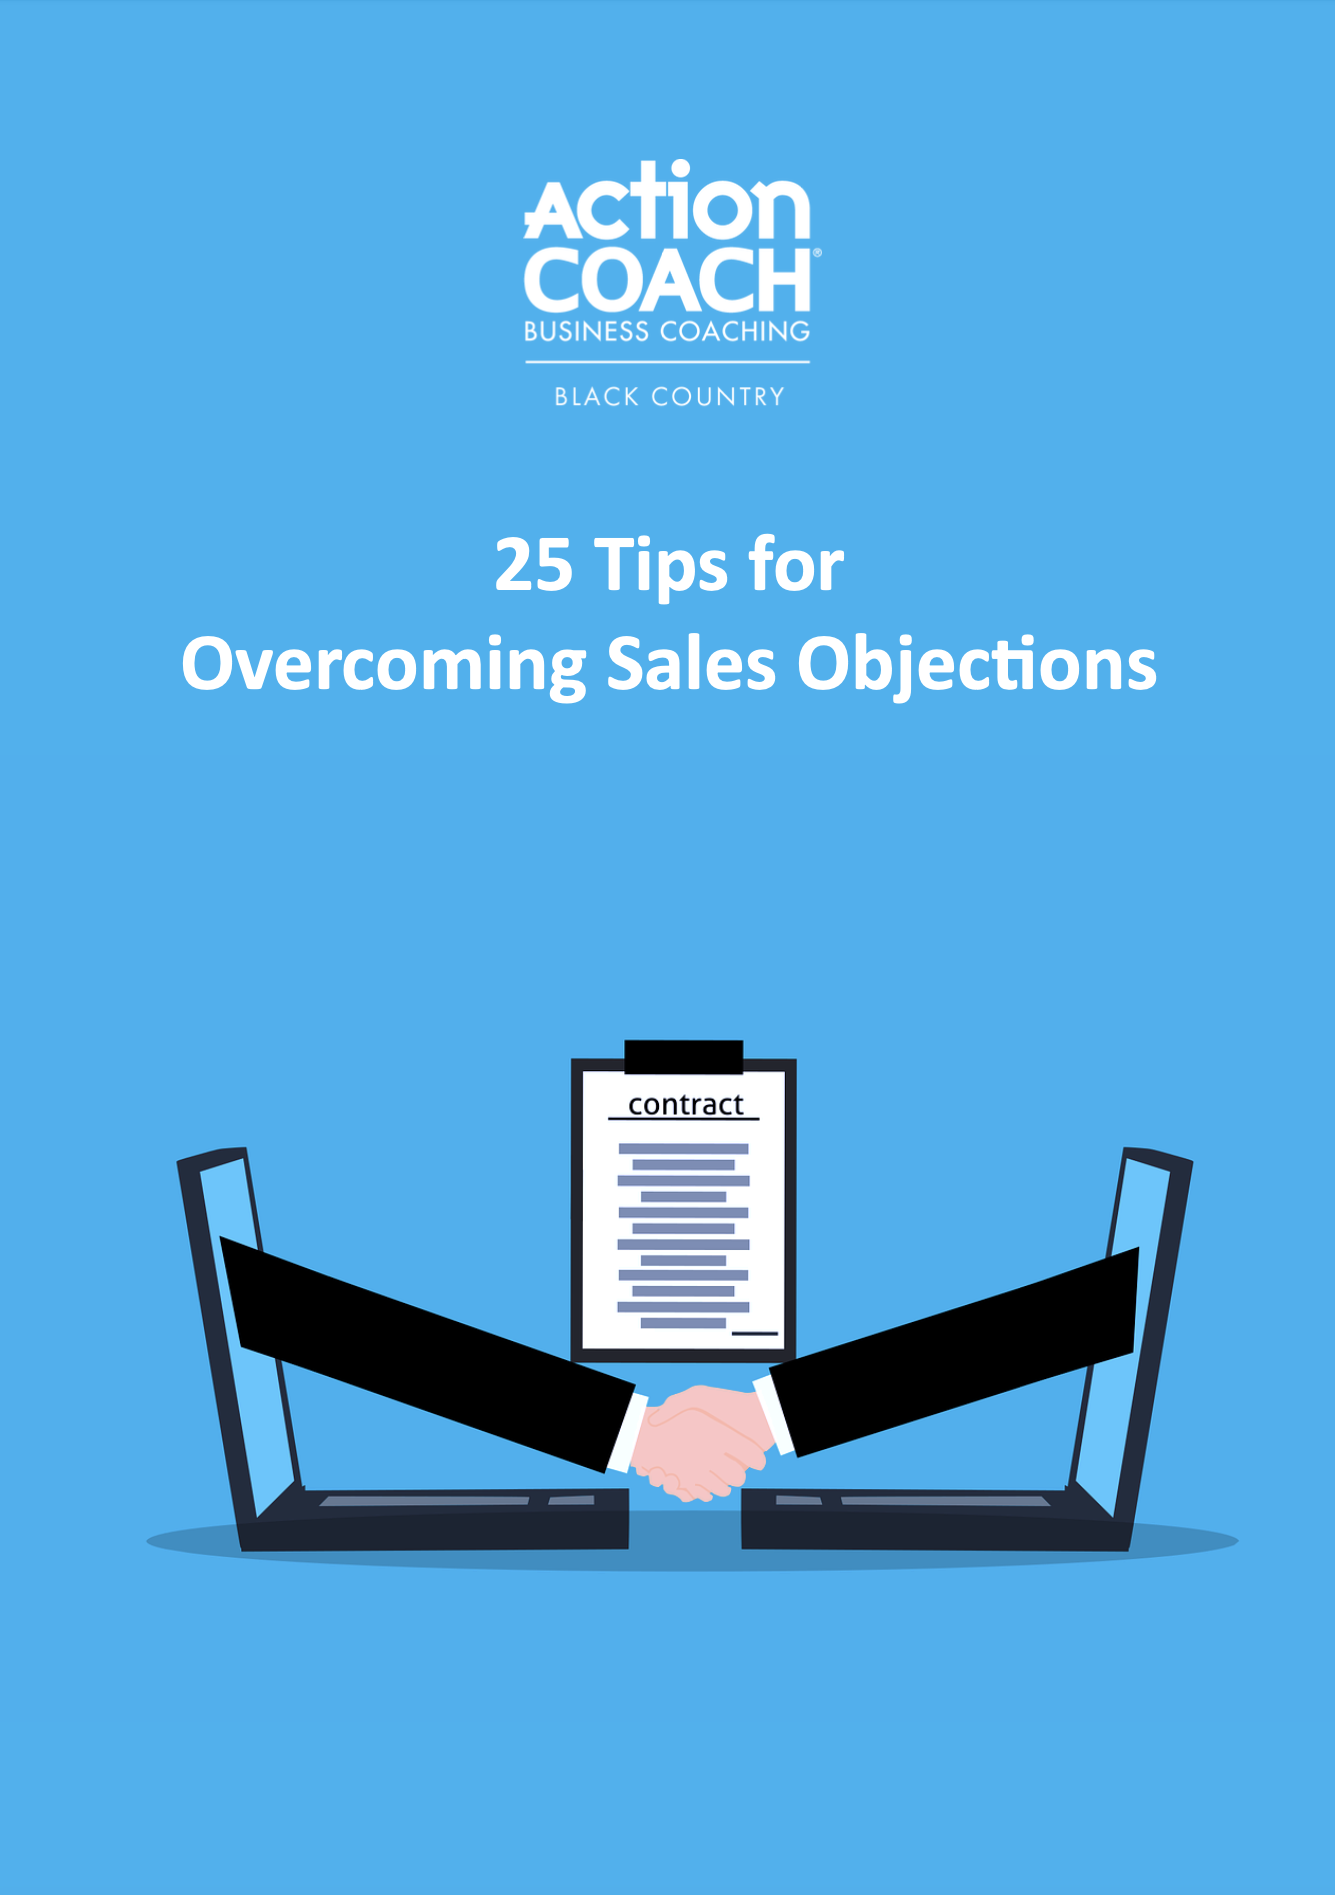 25 Tip for overcoming sales objections cover